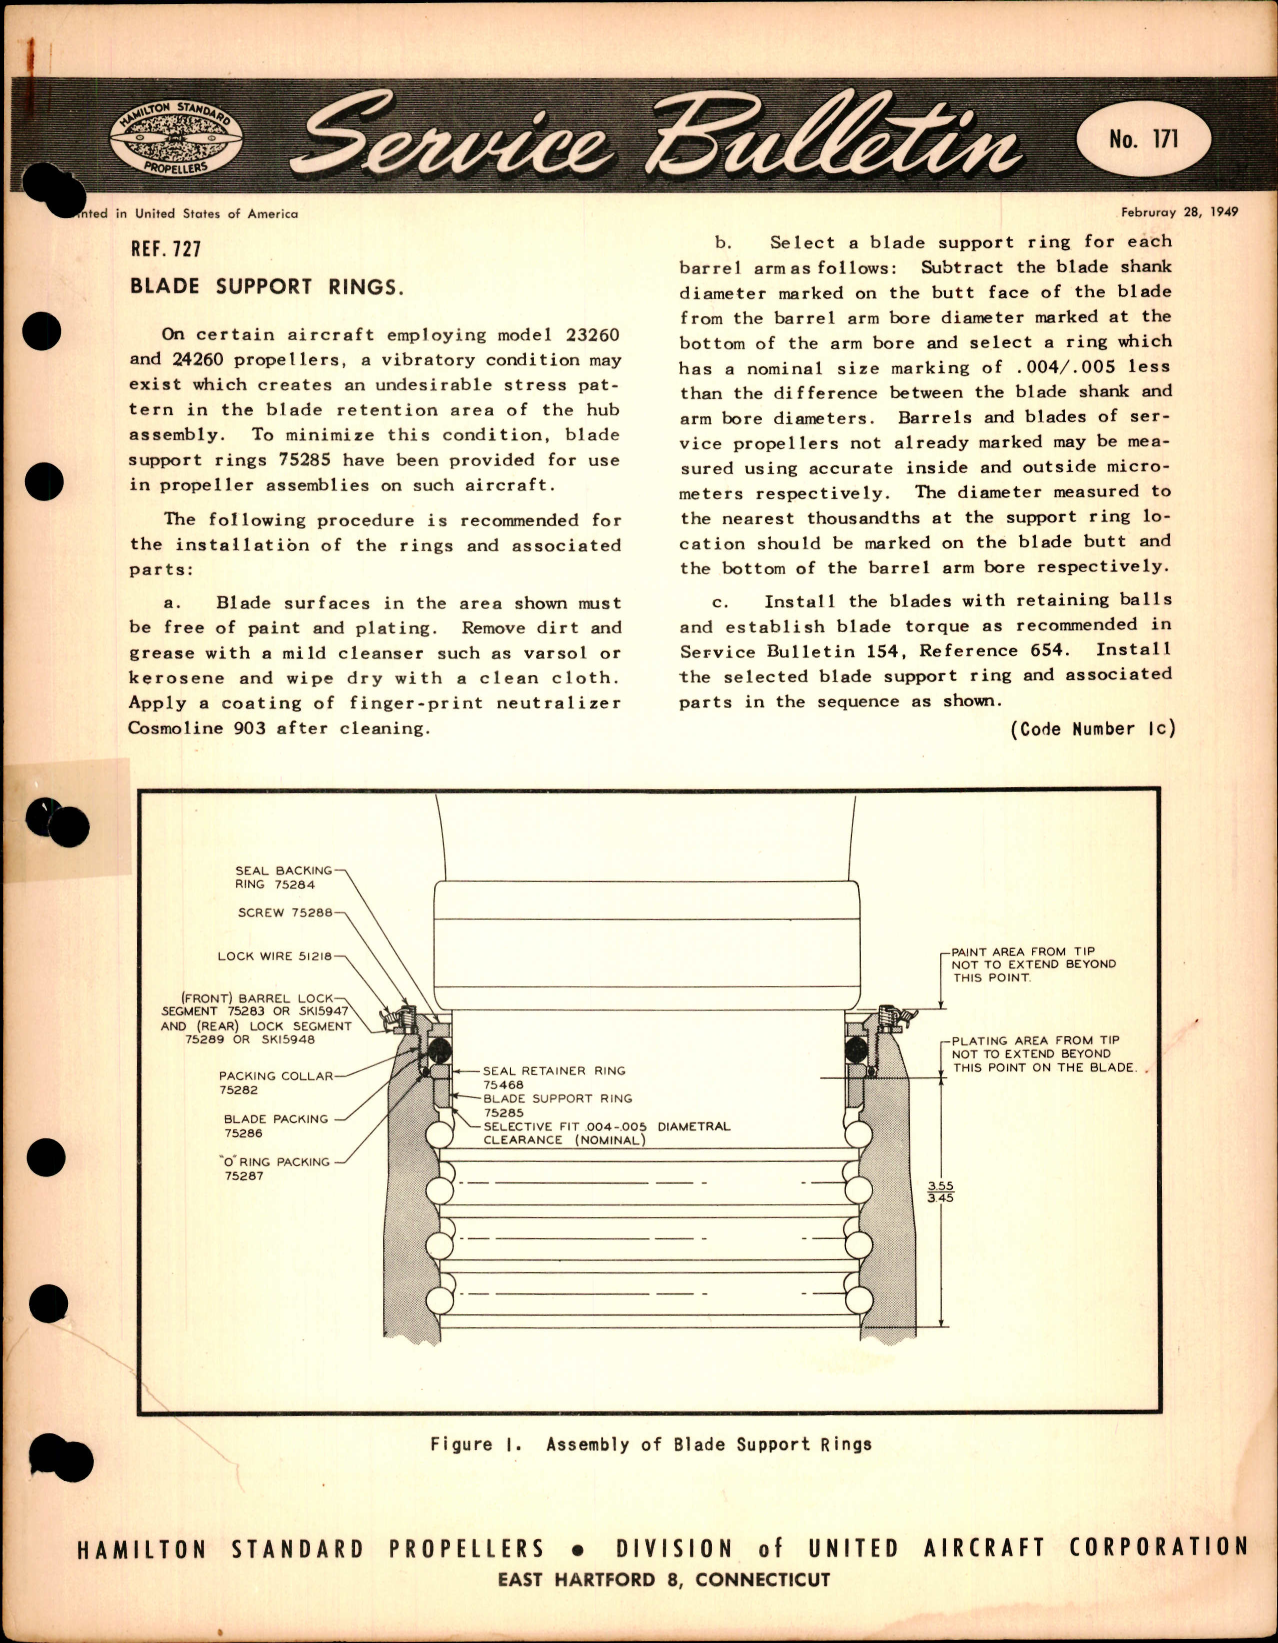 Sample page 1 from AirCorps Library document: Blade Support Rings, Ref 727